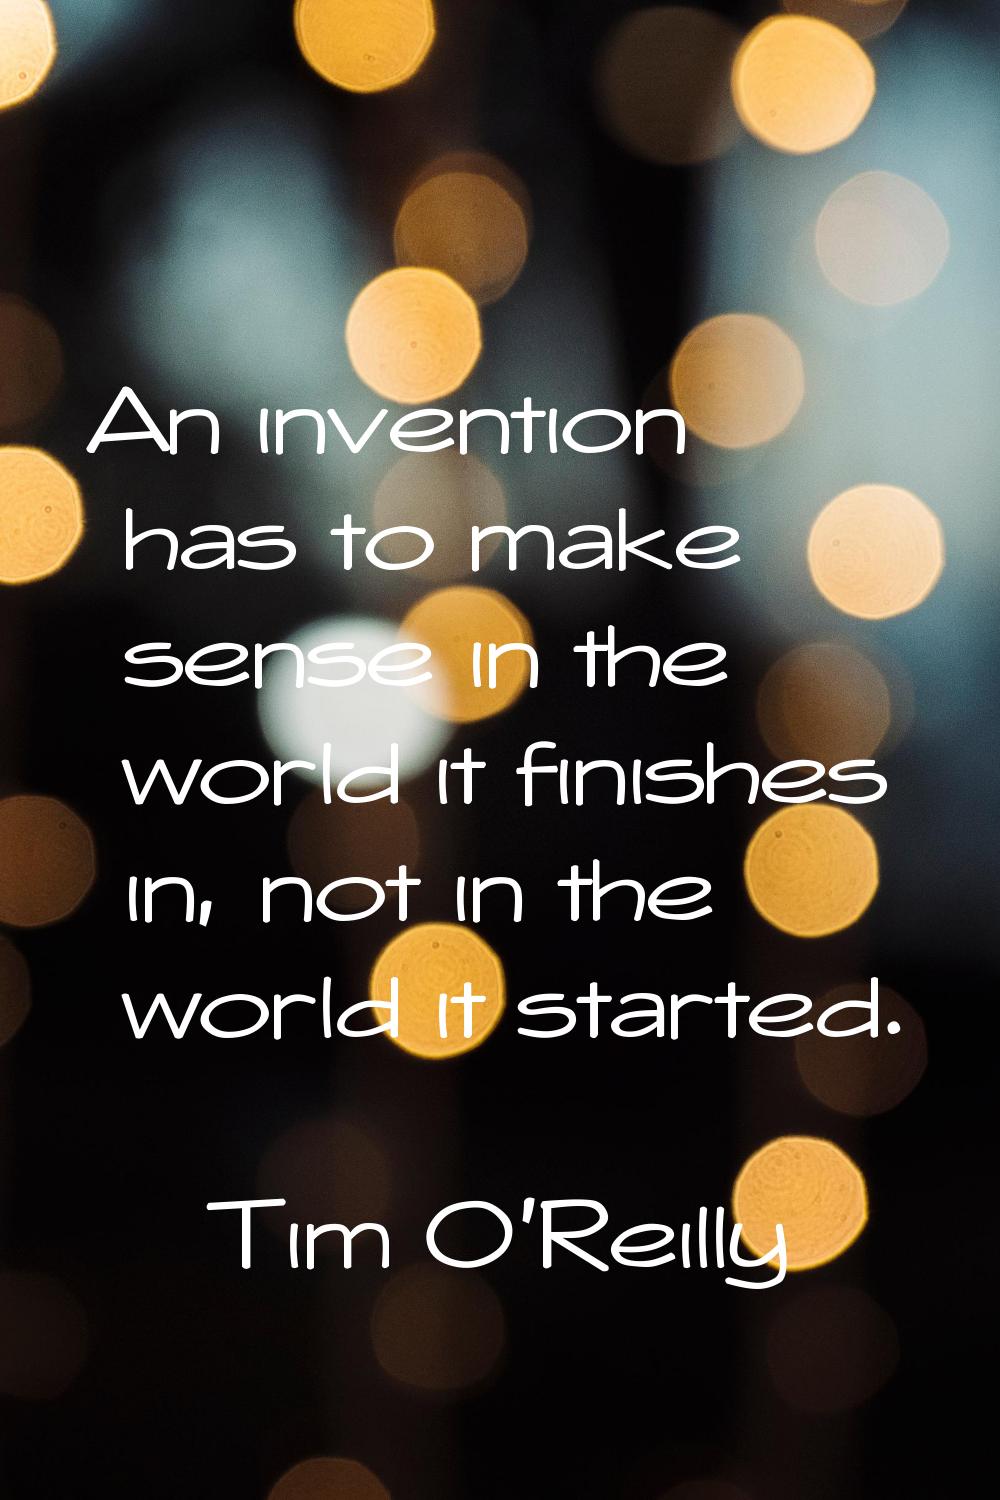 An invention has to make sense in the world it finishes in, not in the world it started.